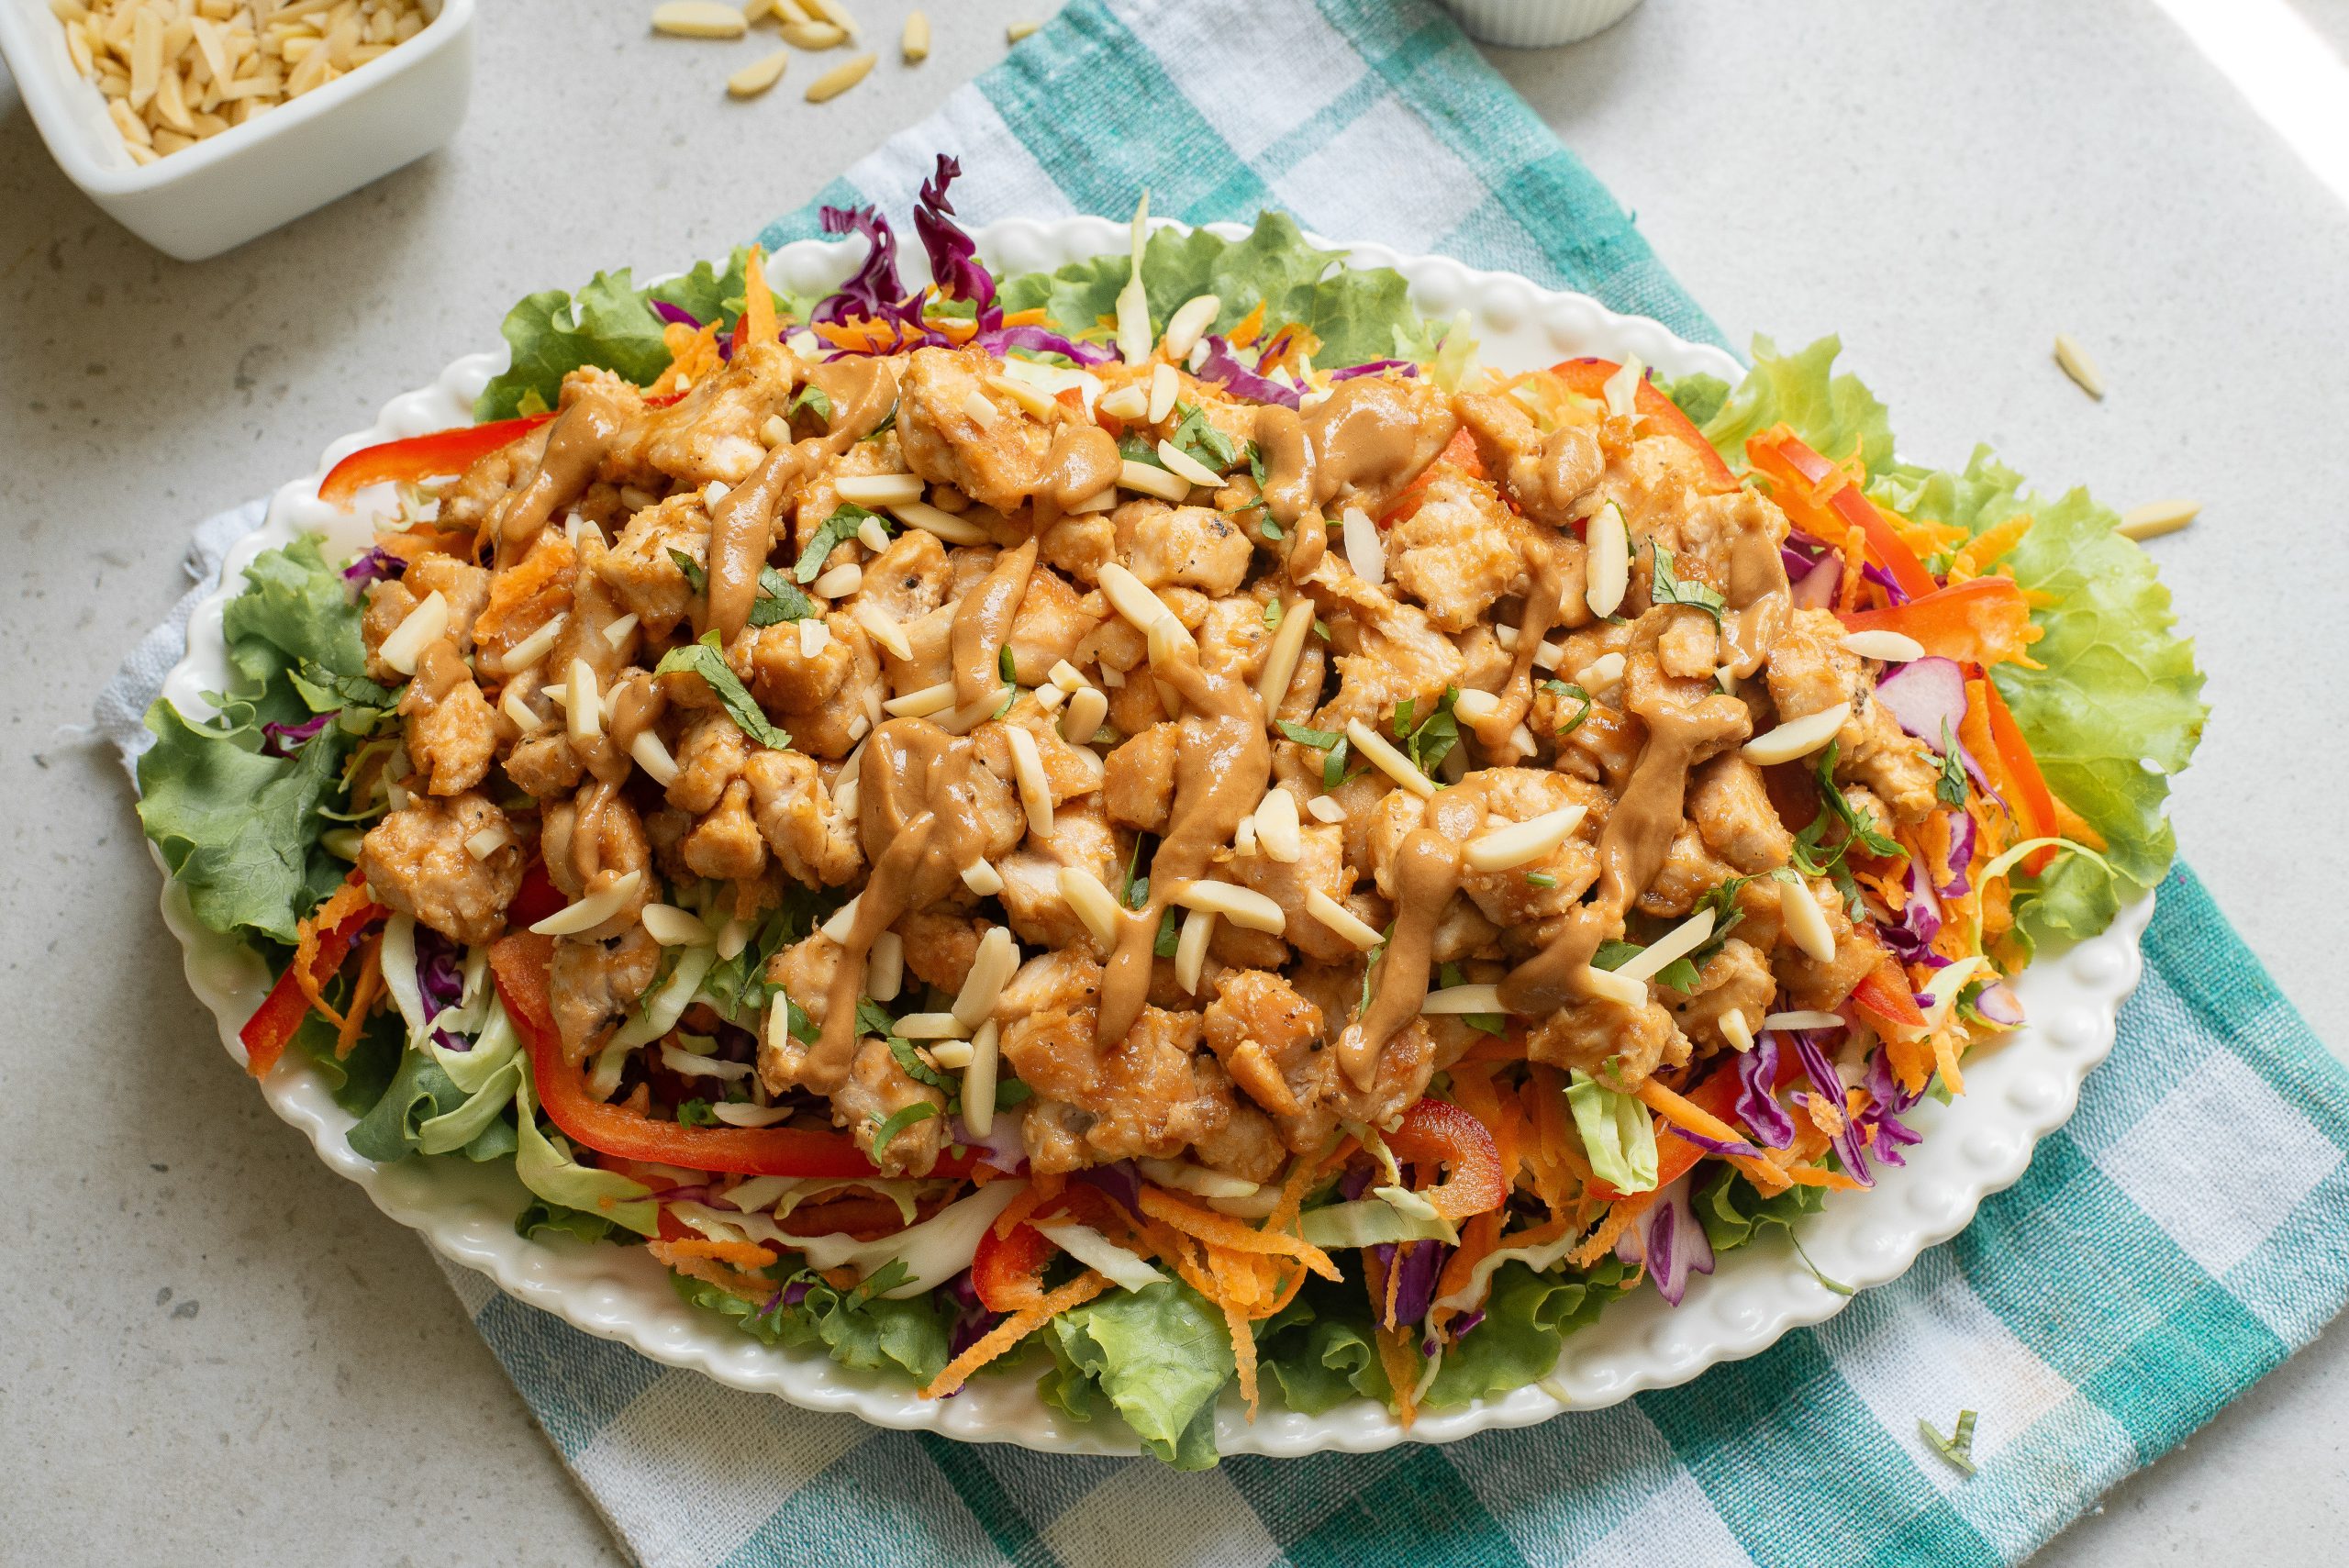 A plate of chicken salad on a table.